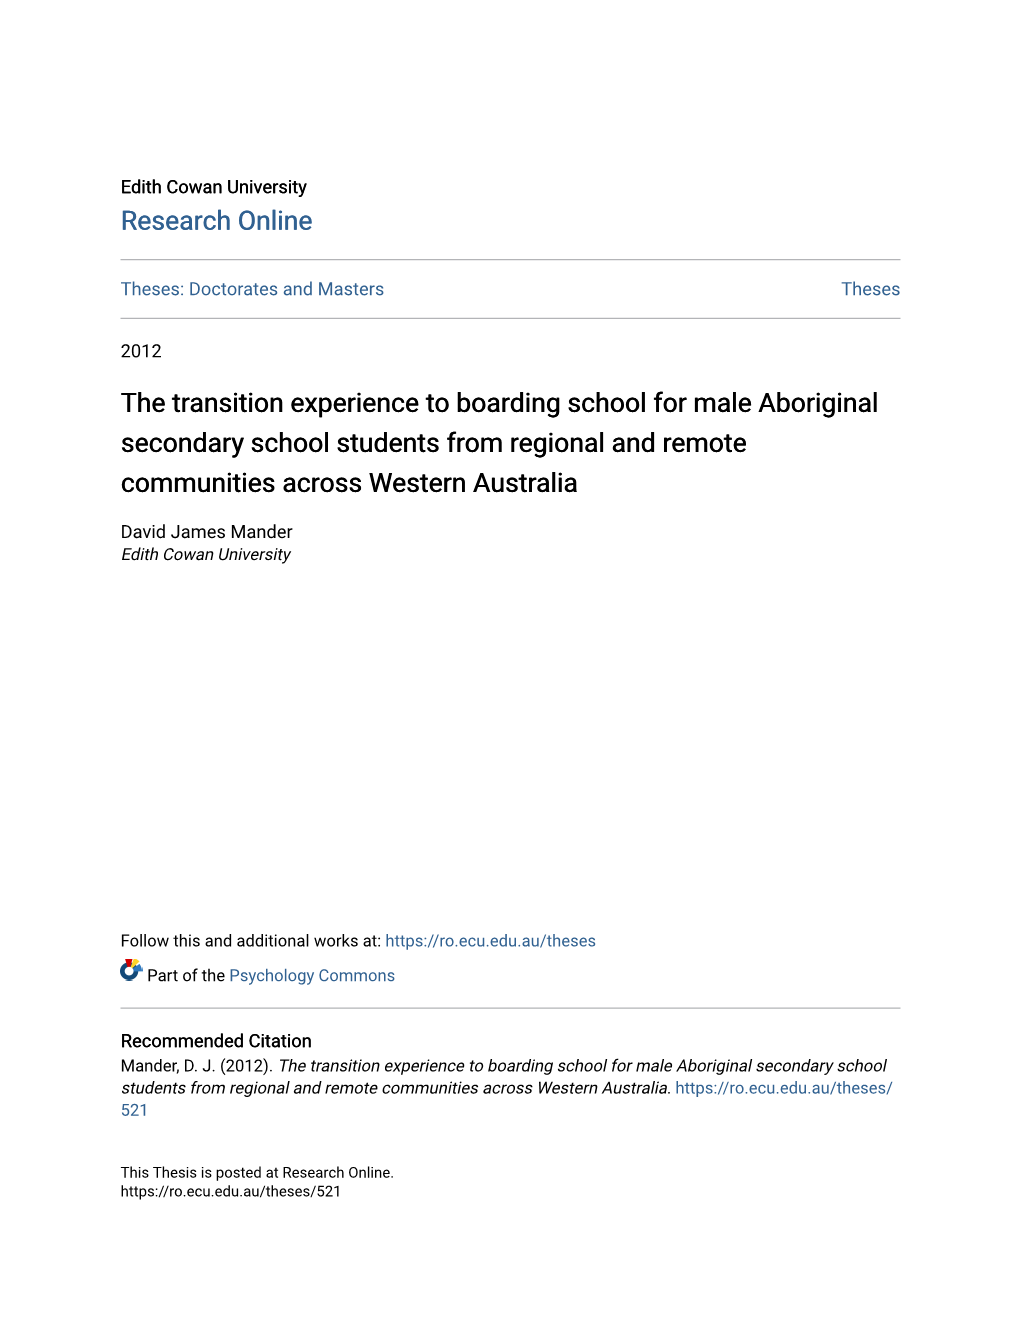 The Transition Experience to Boarding School for Male Aboriginal Secondary School Students from Regional and Remote Communities Across Western Australia